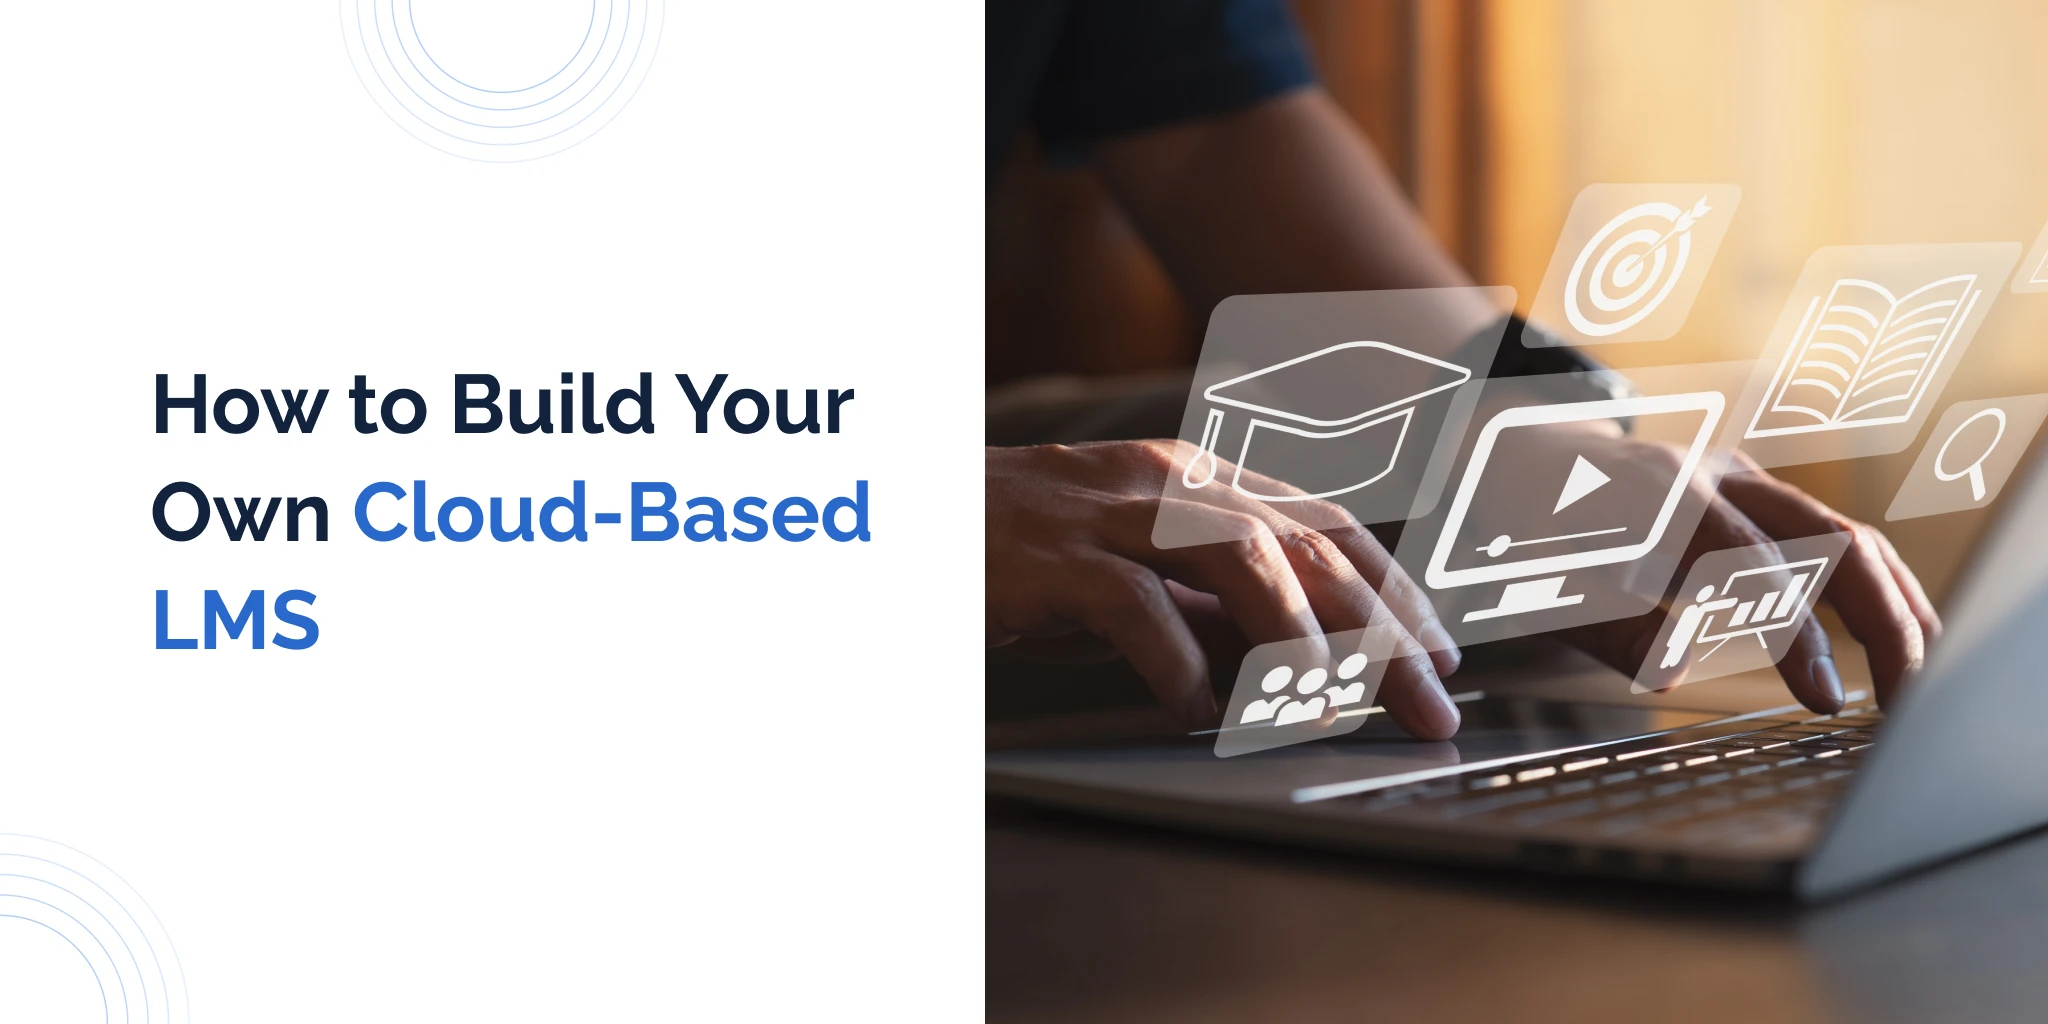 How to build your own cloud-based LMS